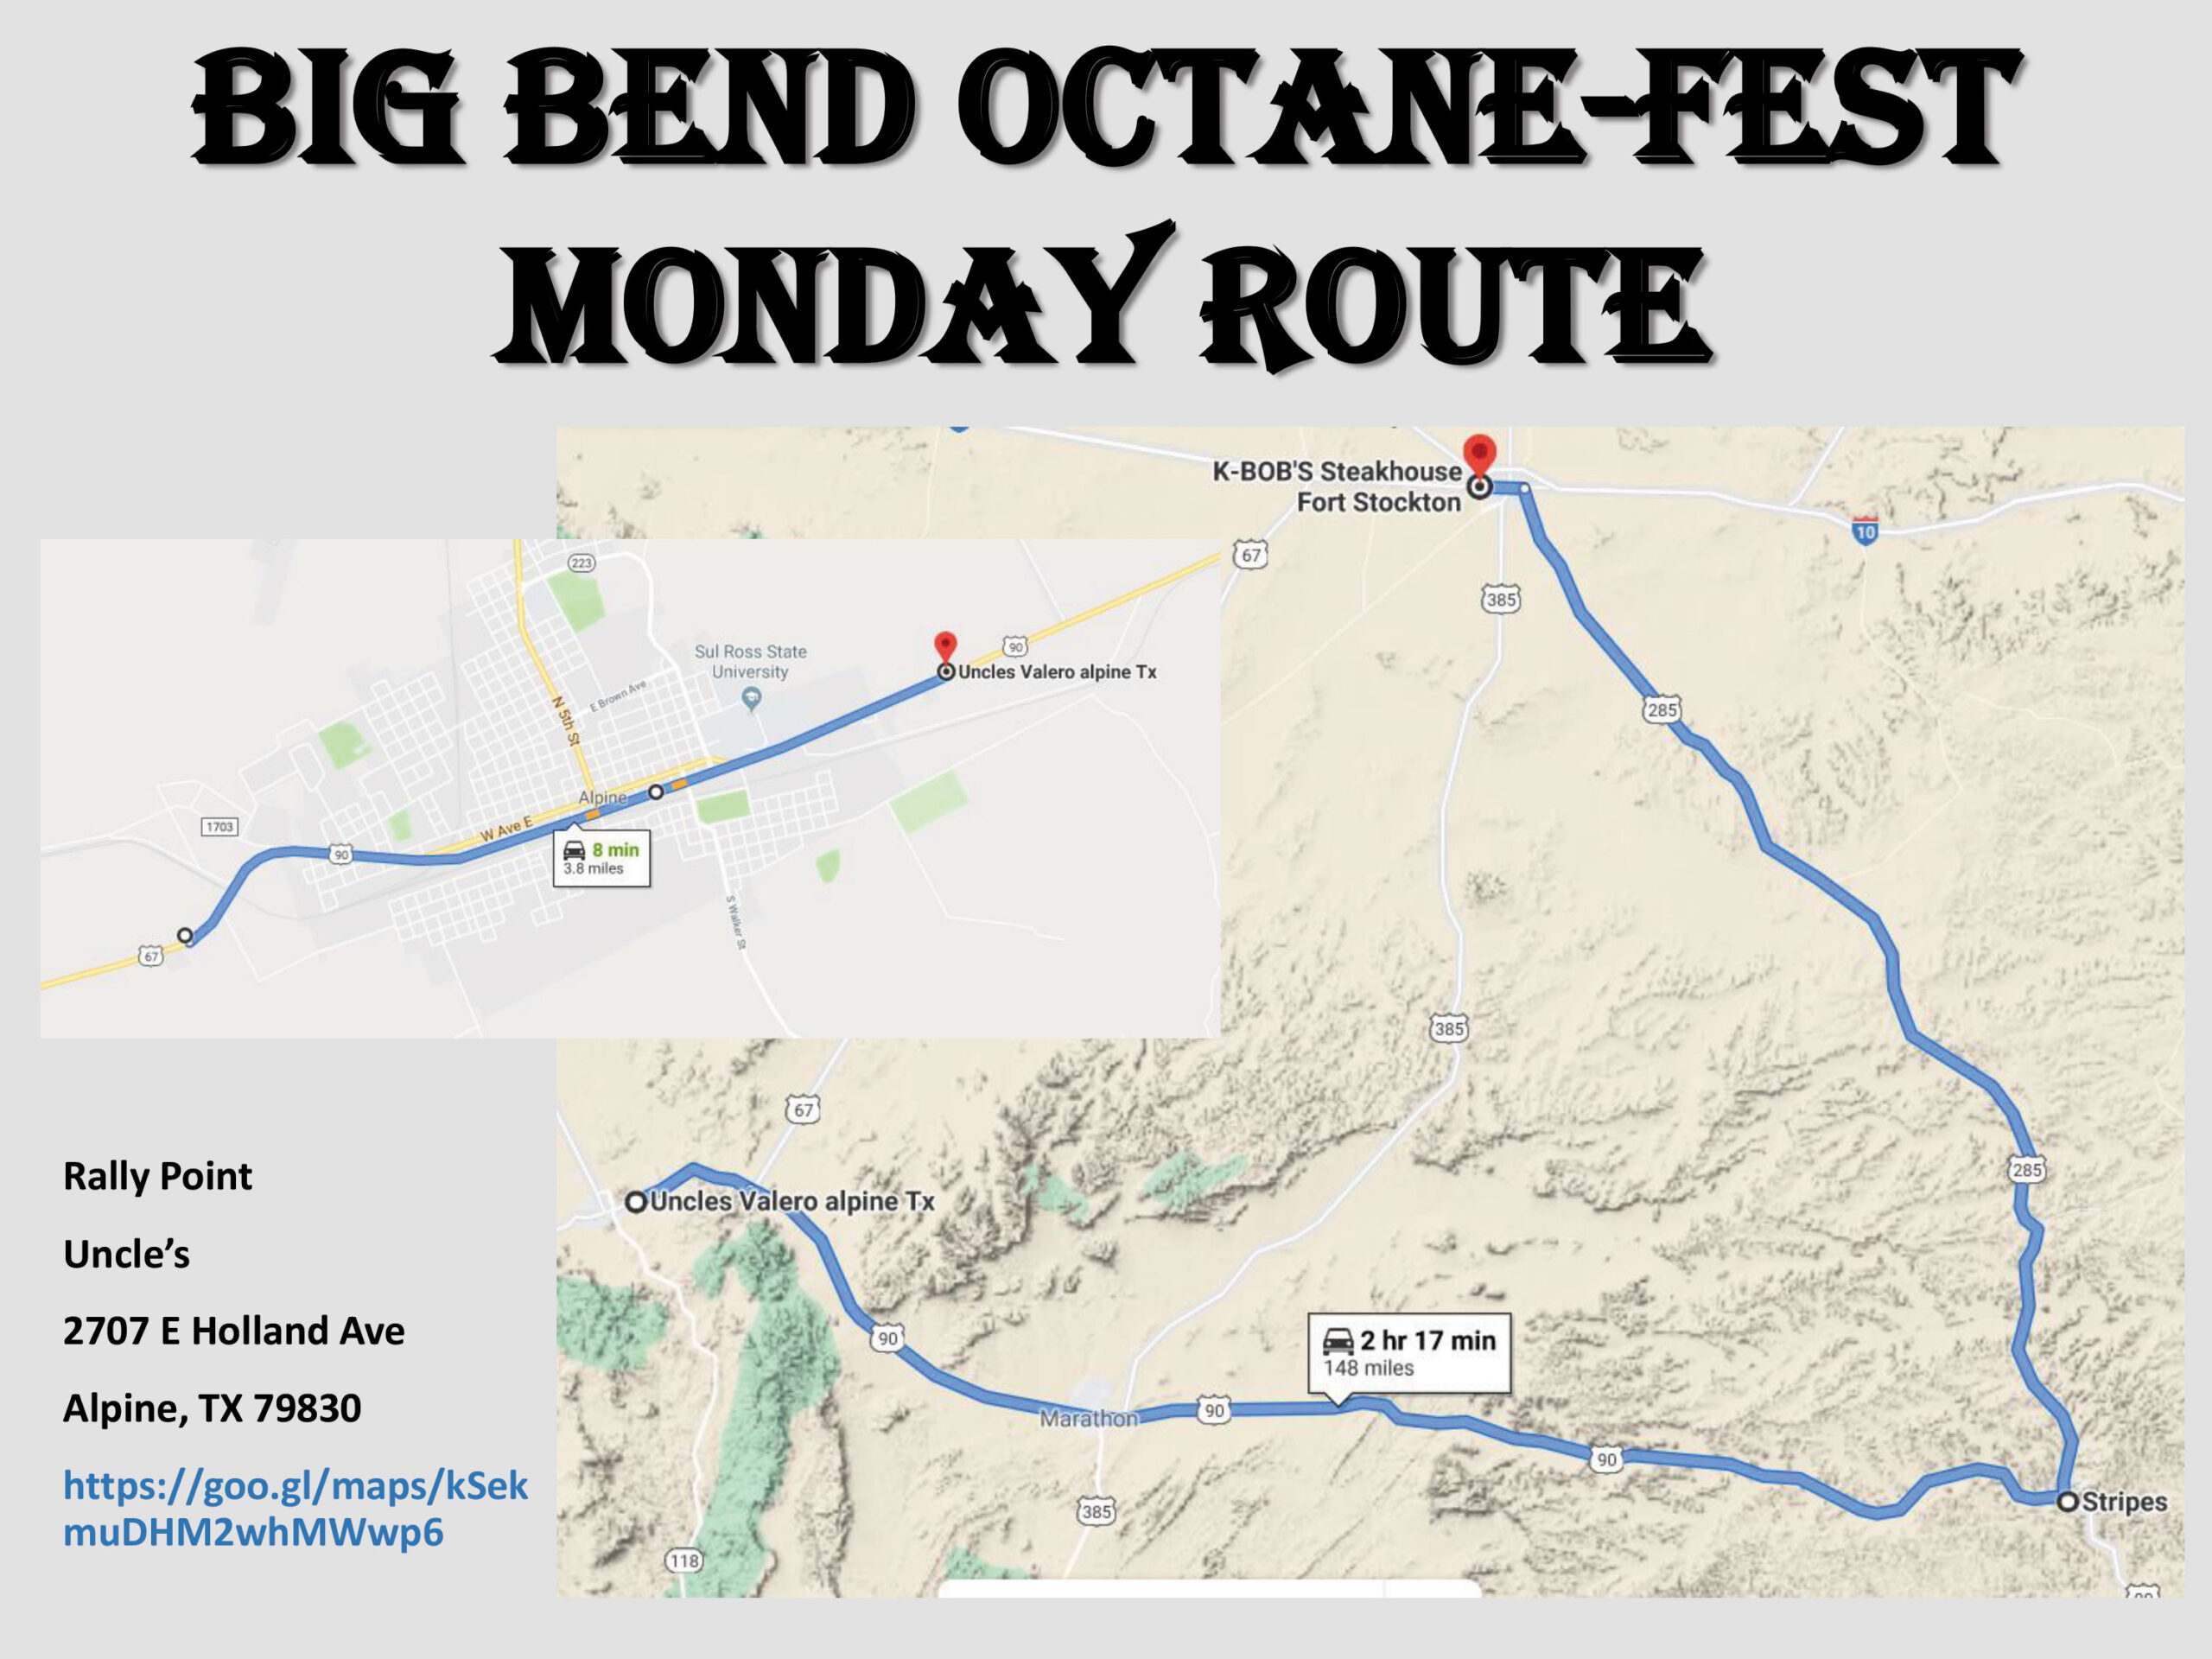 Map of the Big Bend Octane Fest Monday Route.